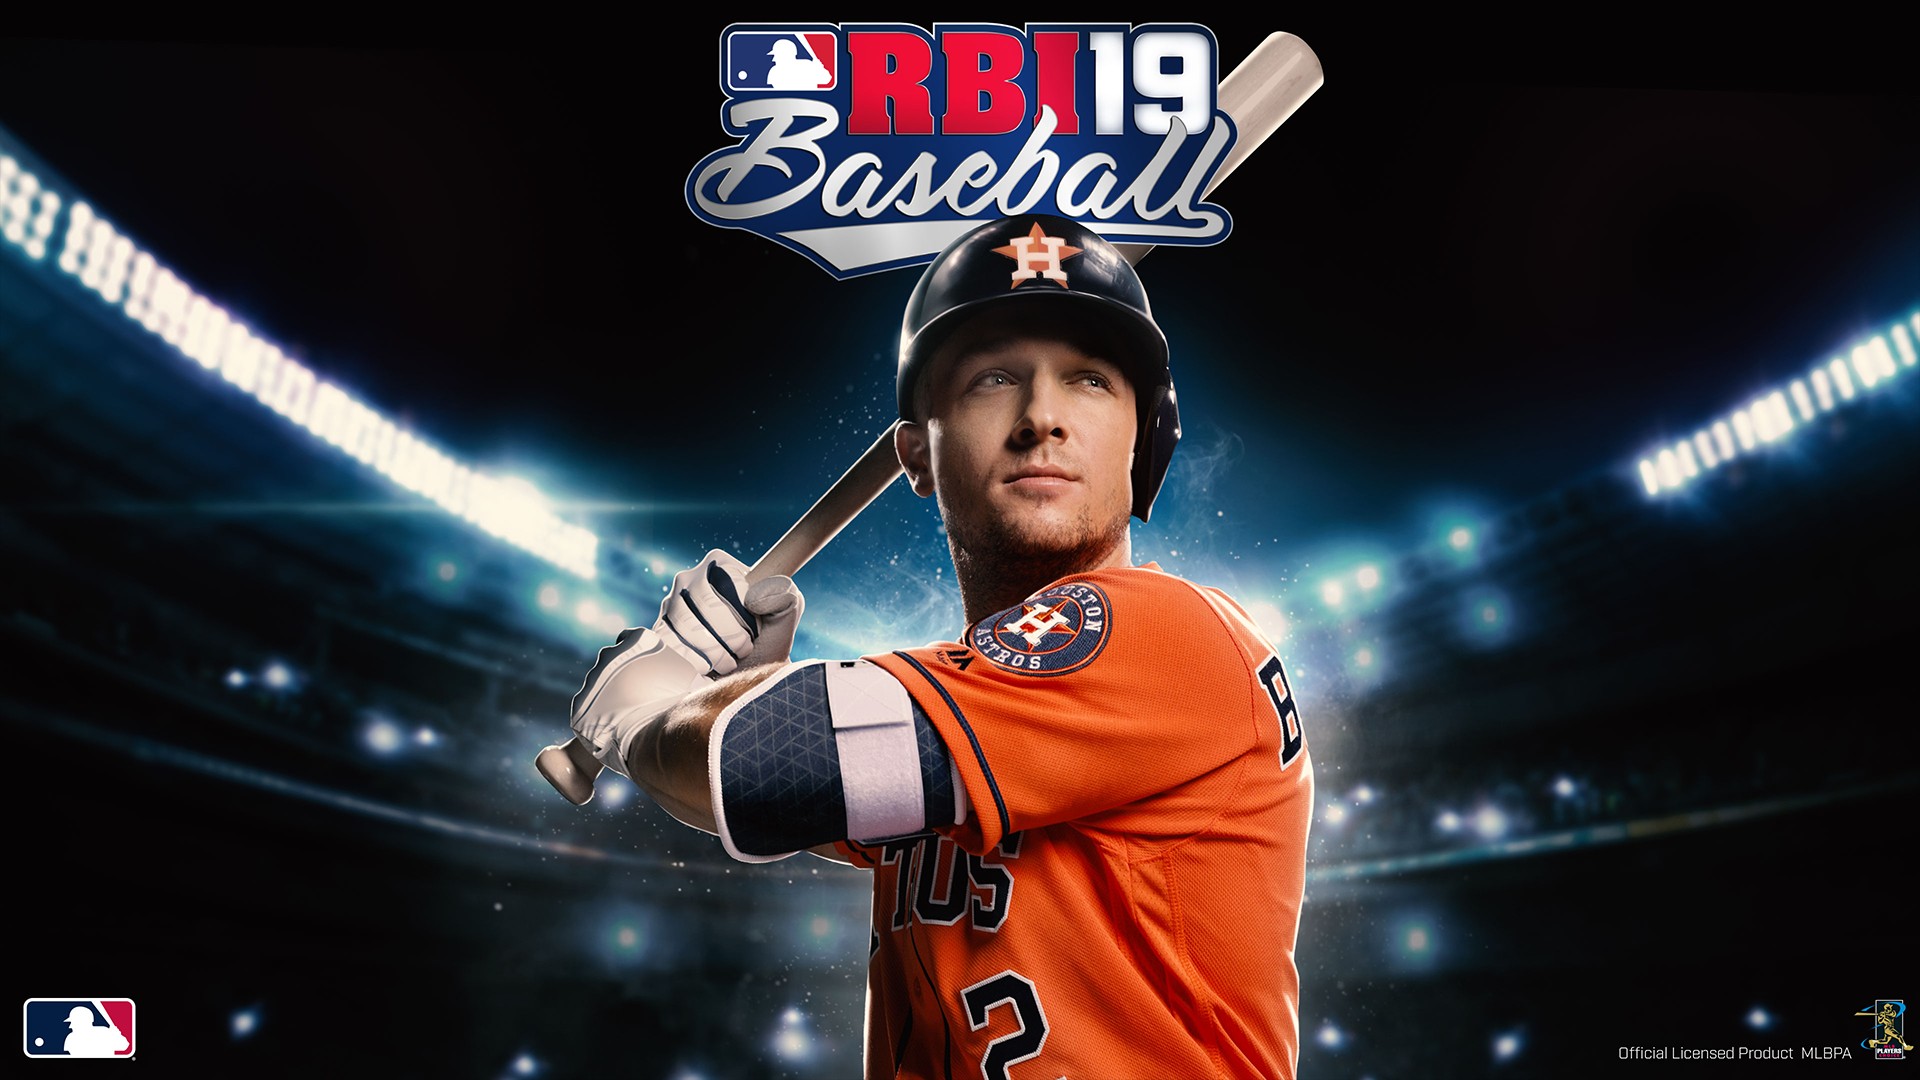 R.B.I. Baseball 19 Coming to Xbox One March 5, Pre-Order Today